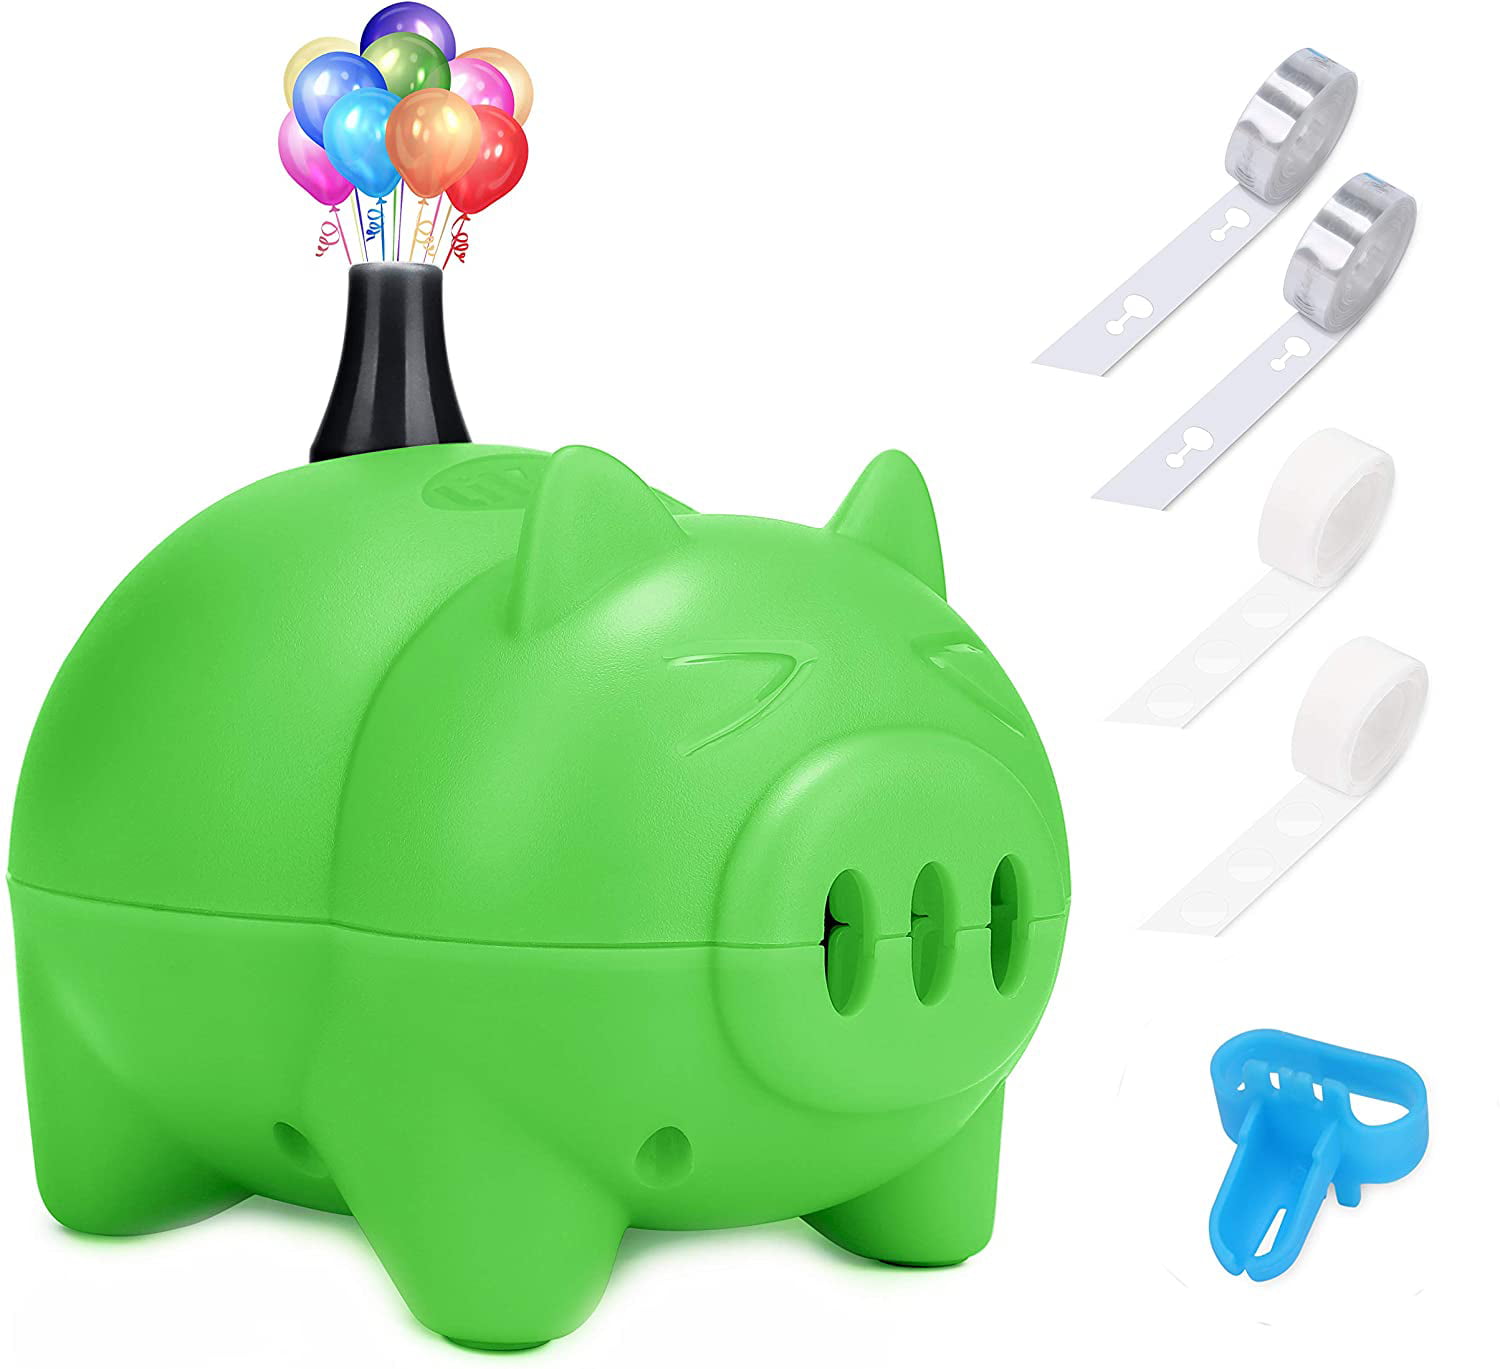 Details about   New Electric Balloons Air Pump Inflator Air Blower Pump Weddings Birthdays Party 